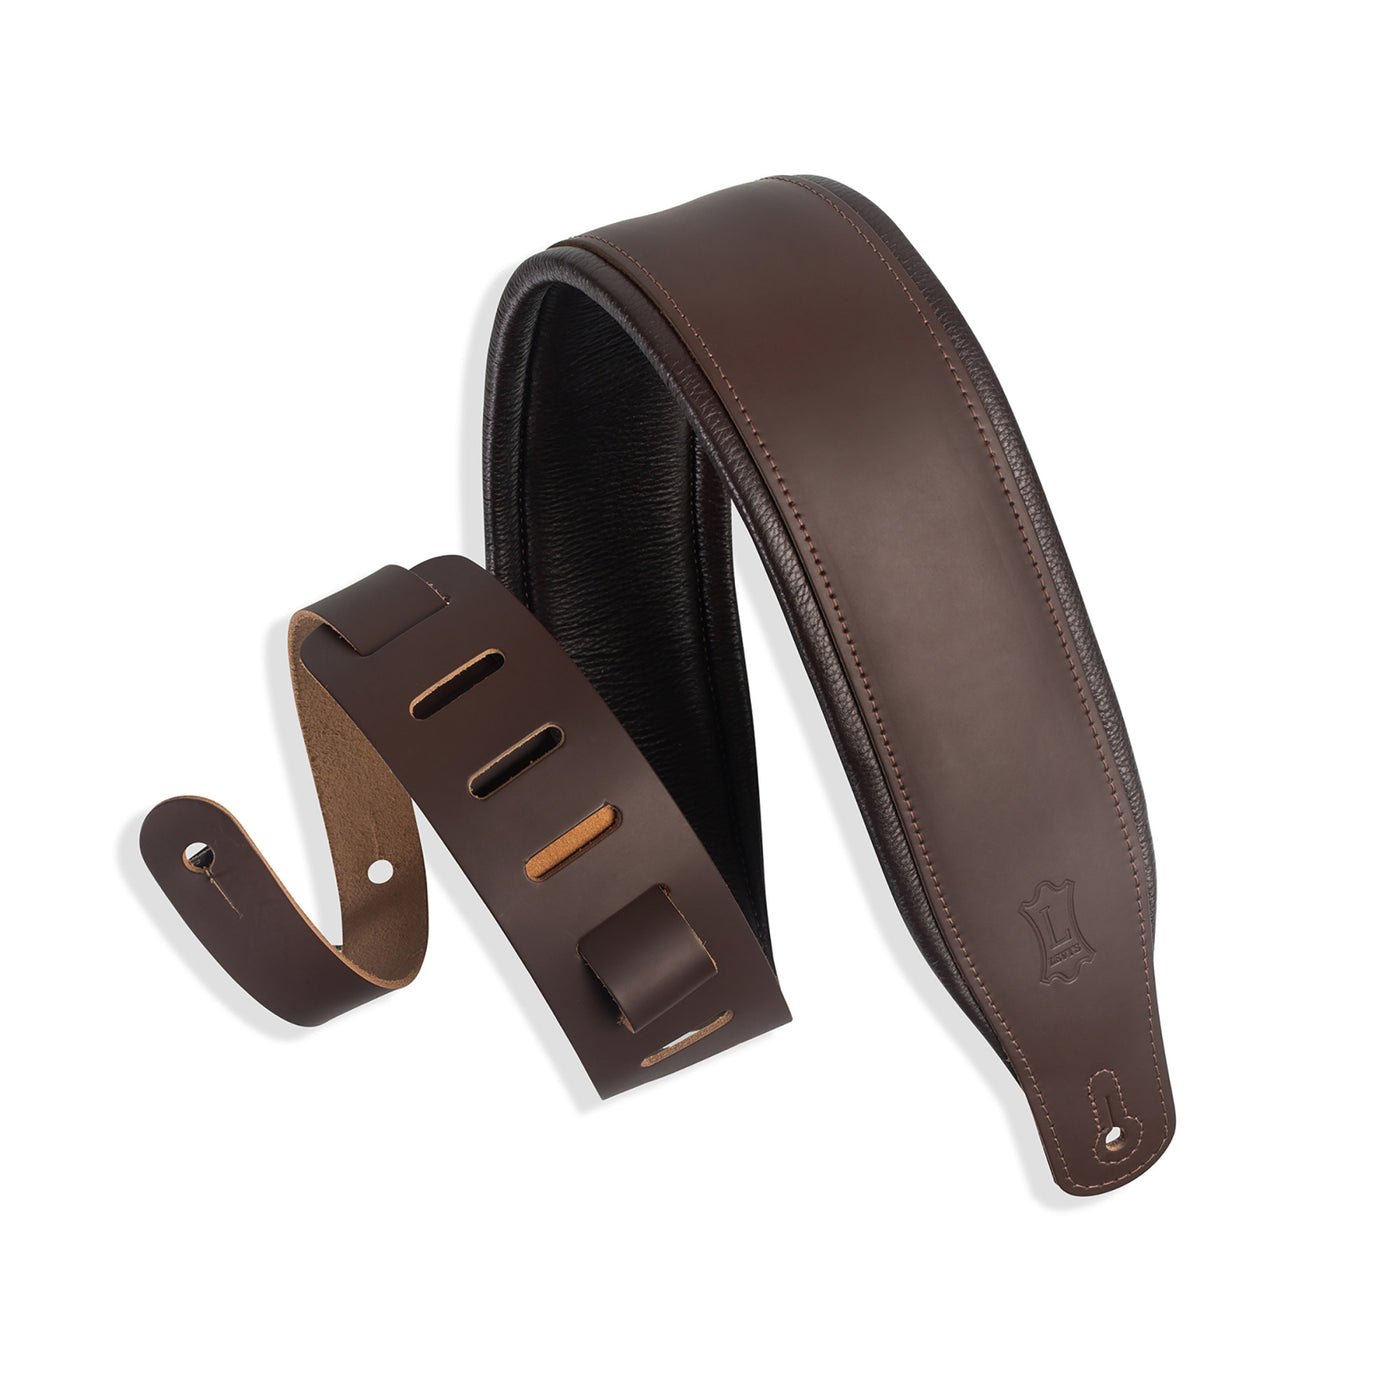 Levy's 3" Padded Leather Strap in Dark Brown with Dark Brown Backing